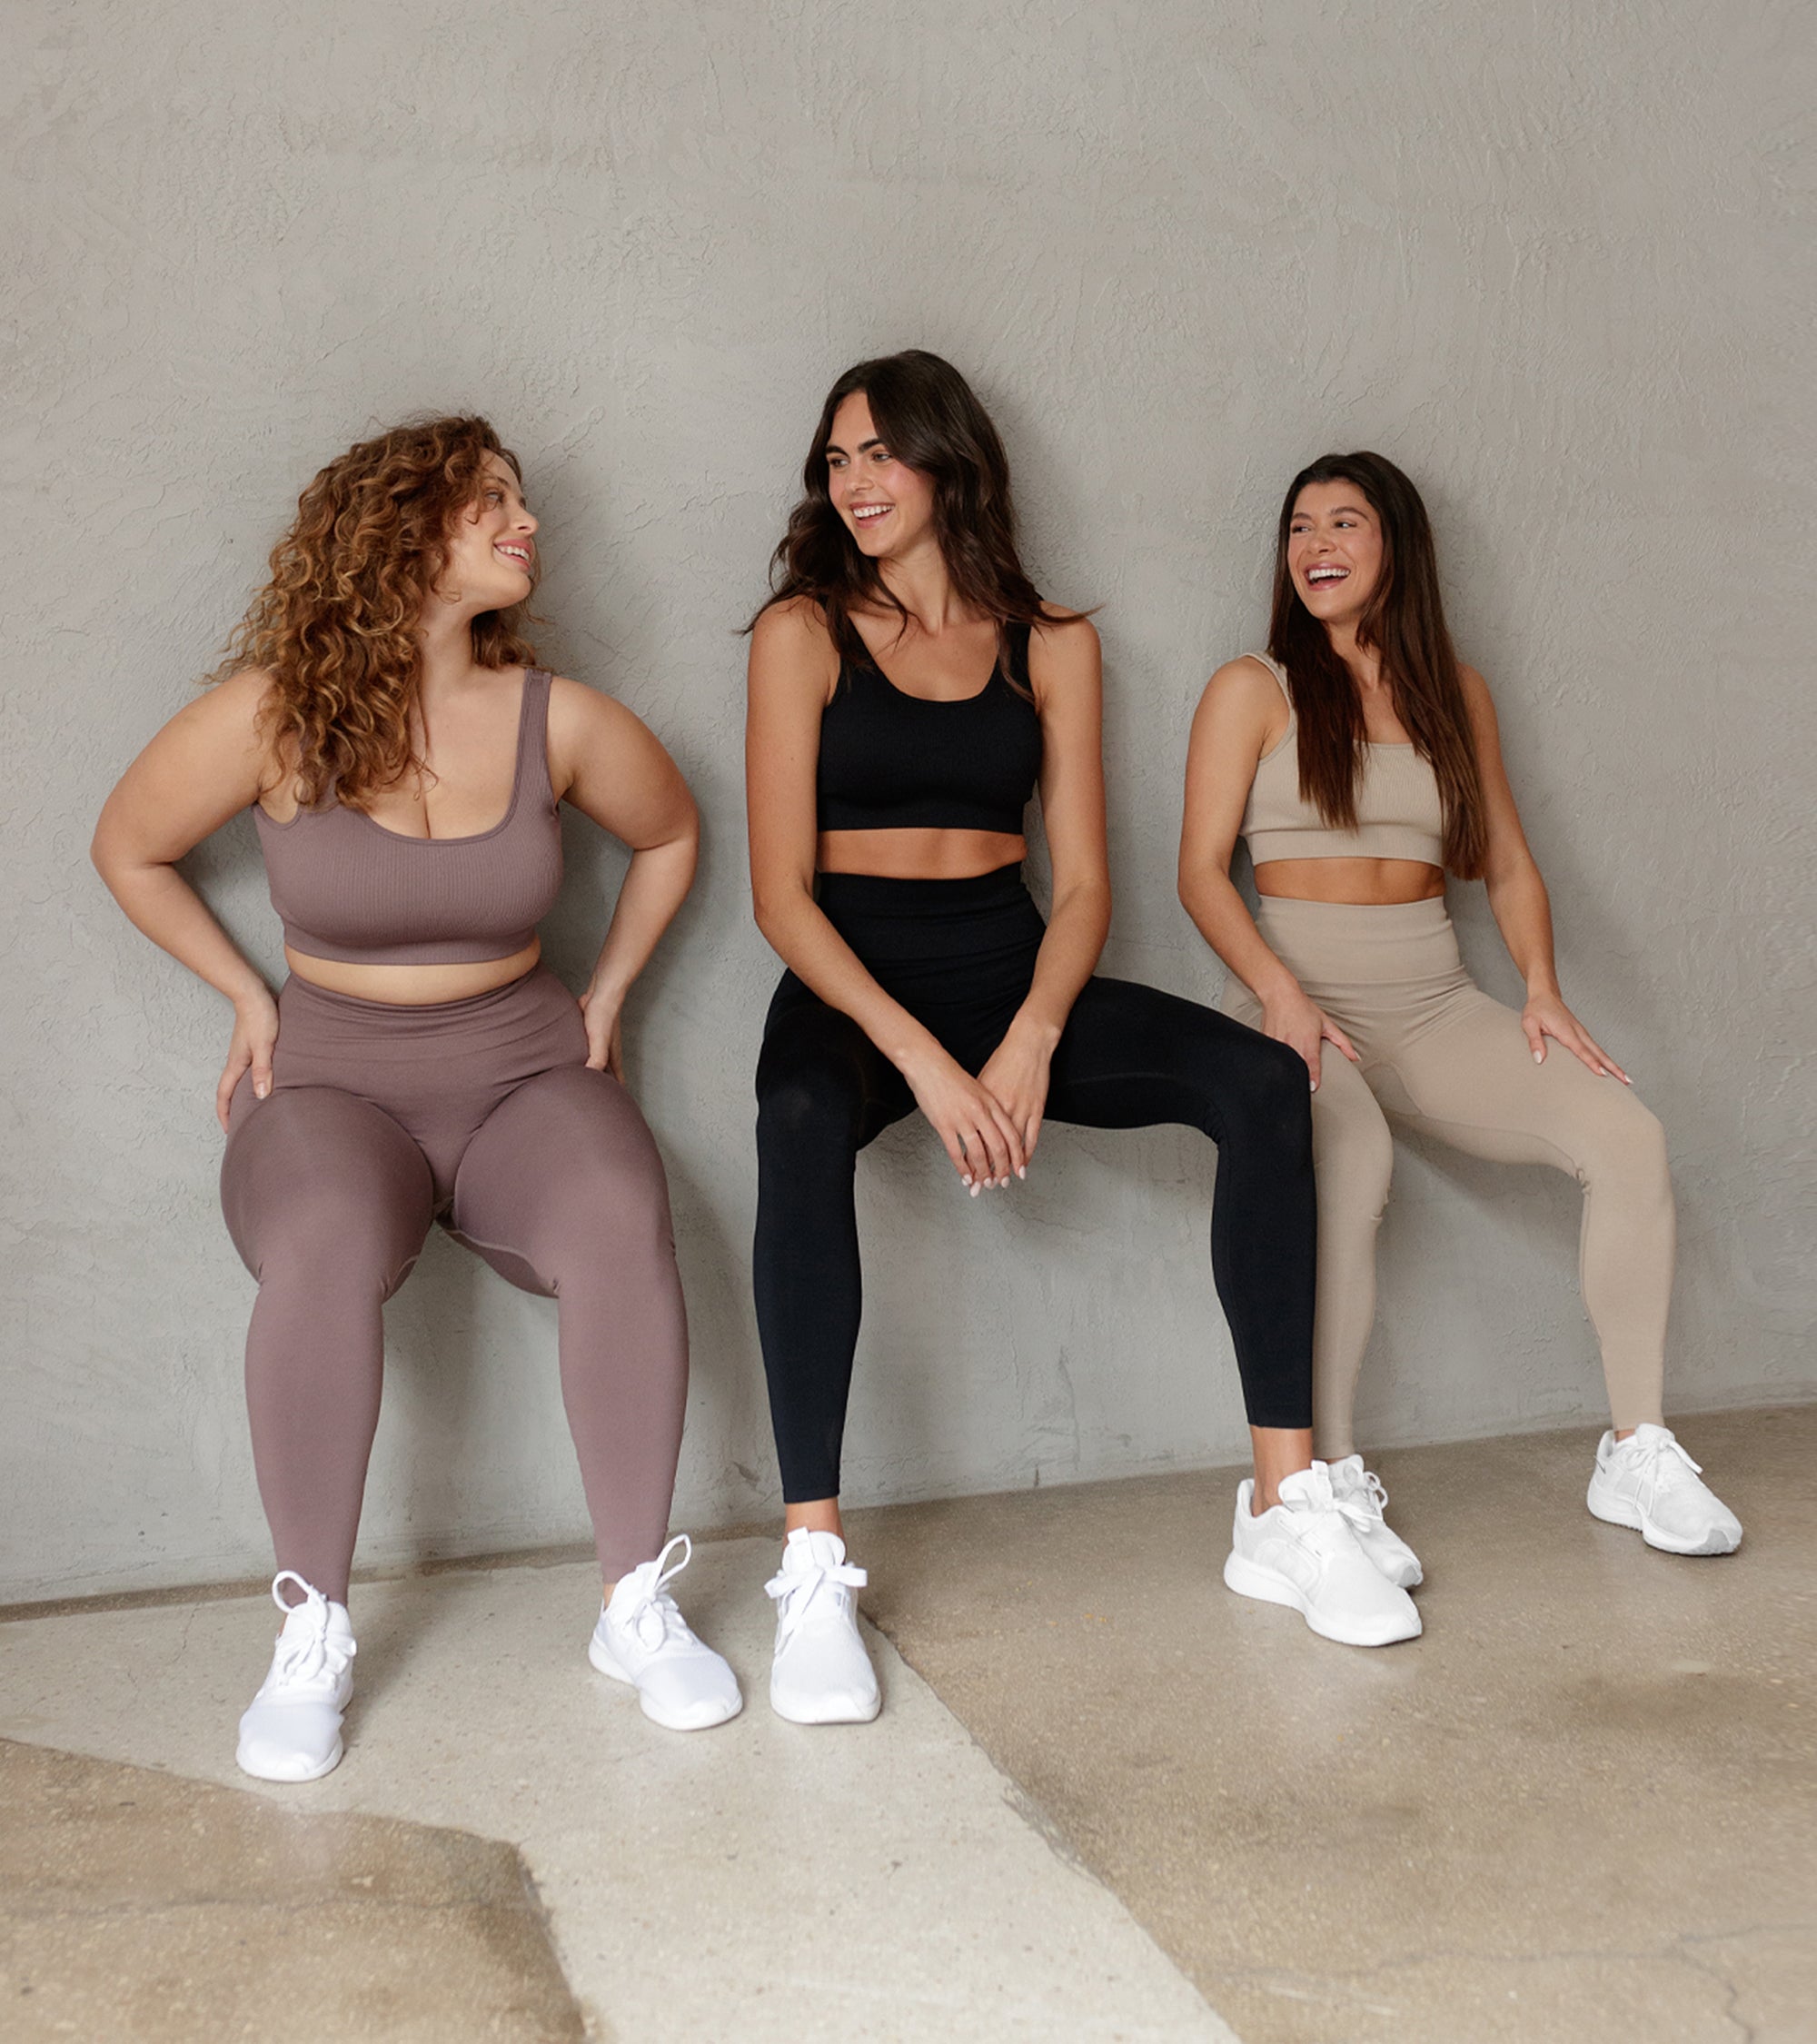 NEW SERIES - Activewear Review & Style 2 Ways. These are the Pavoi